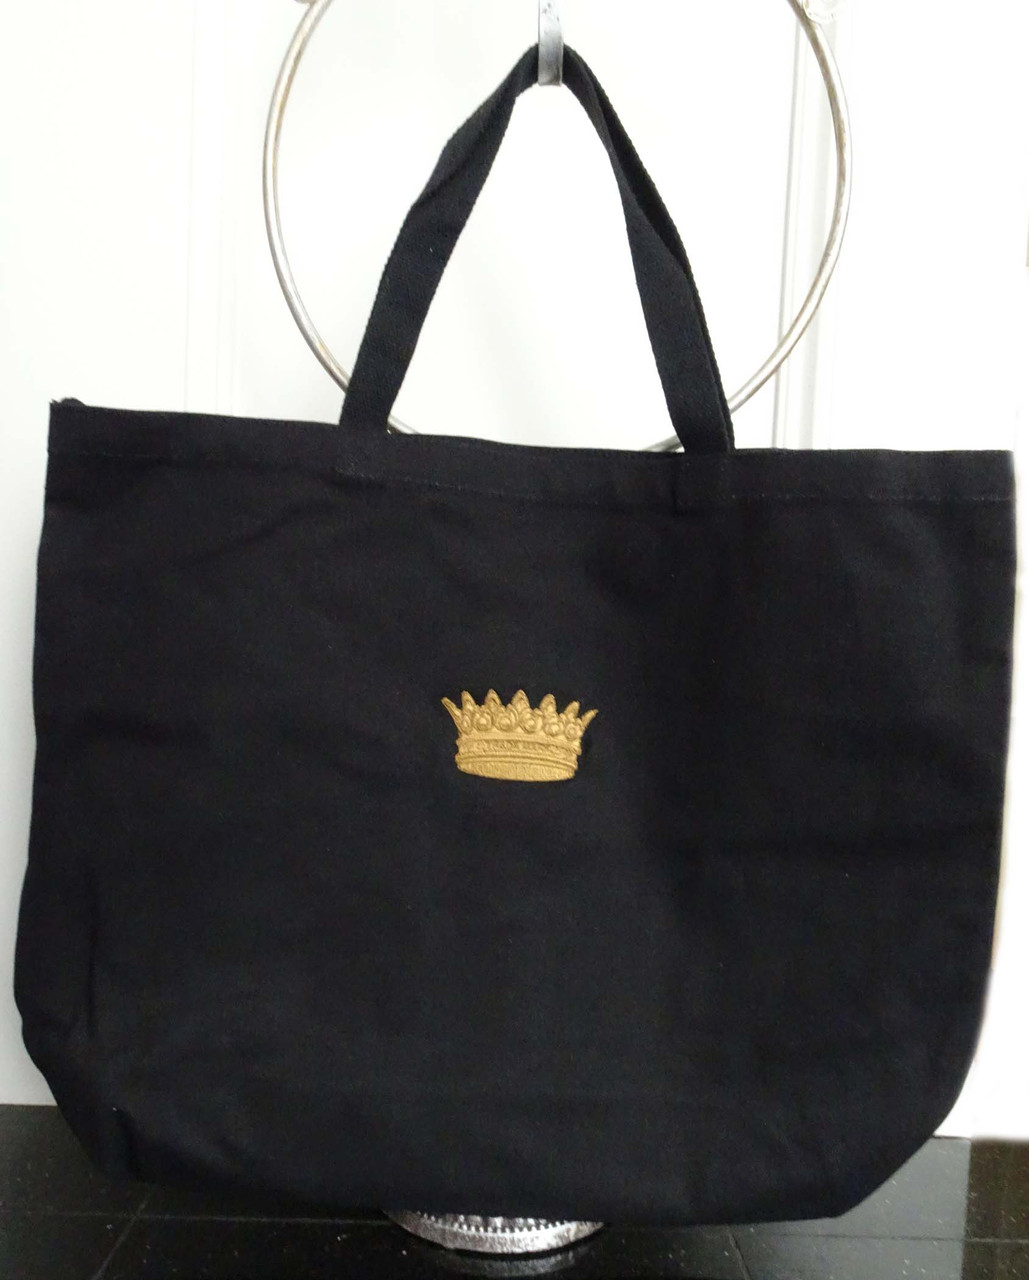 BAG CANVAS BLACK TOTE WITH HERSCHEDE AND CROWN